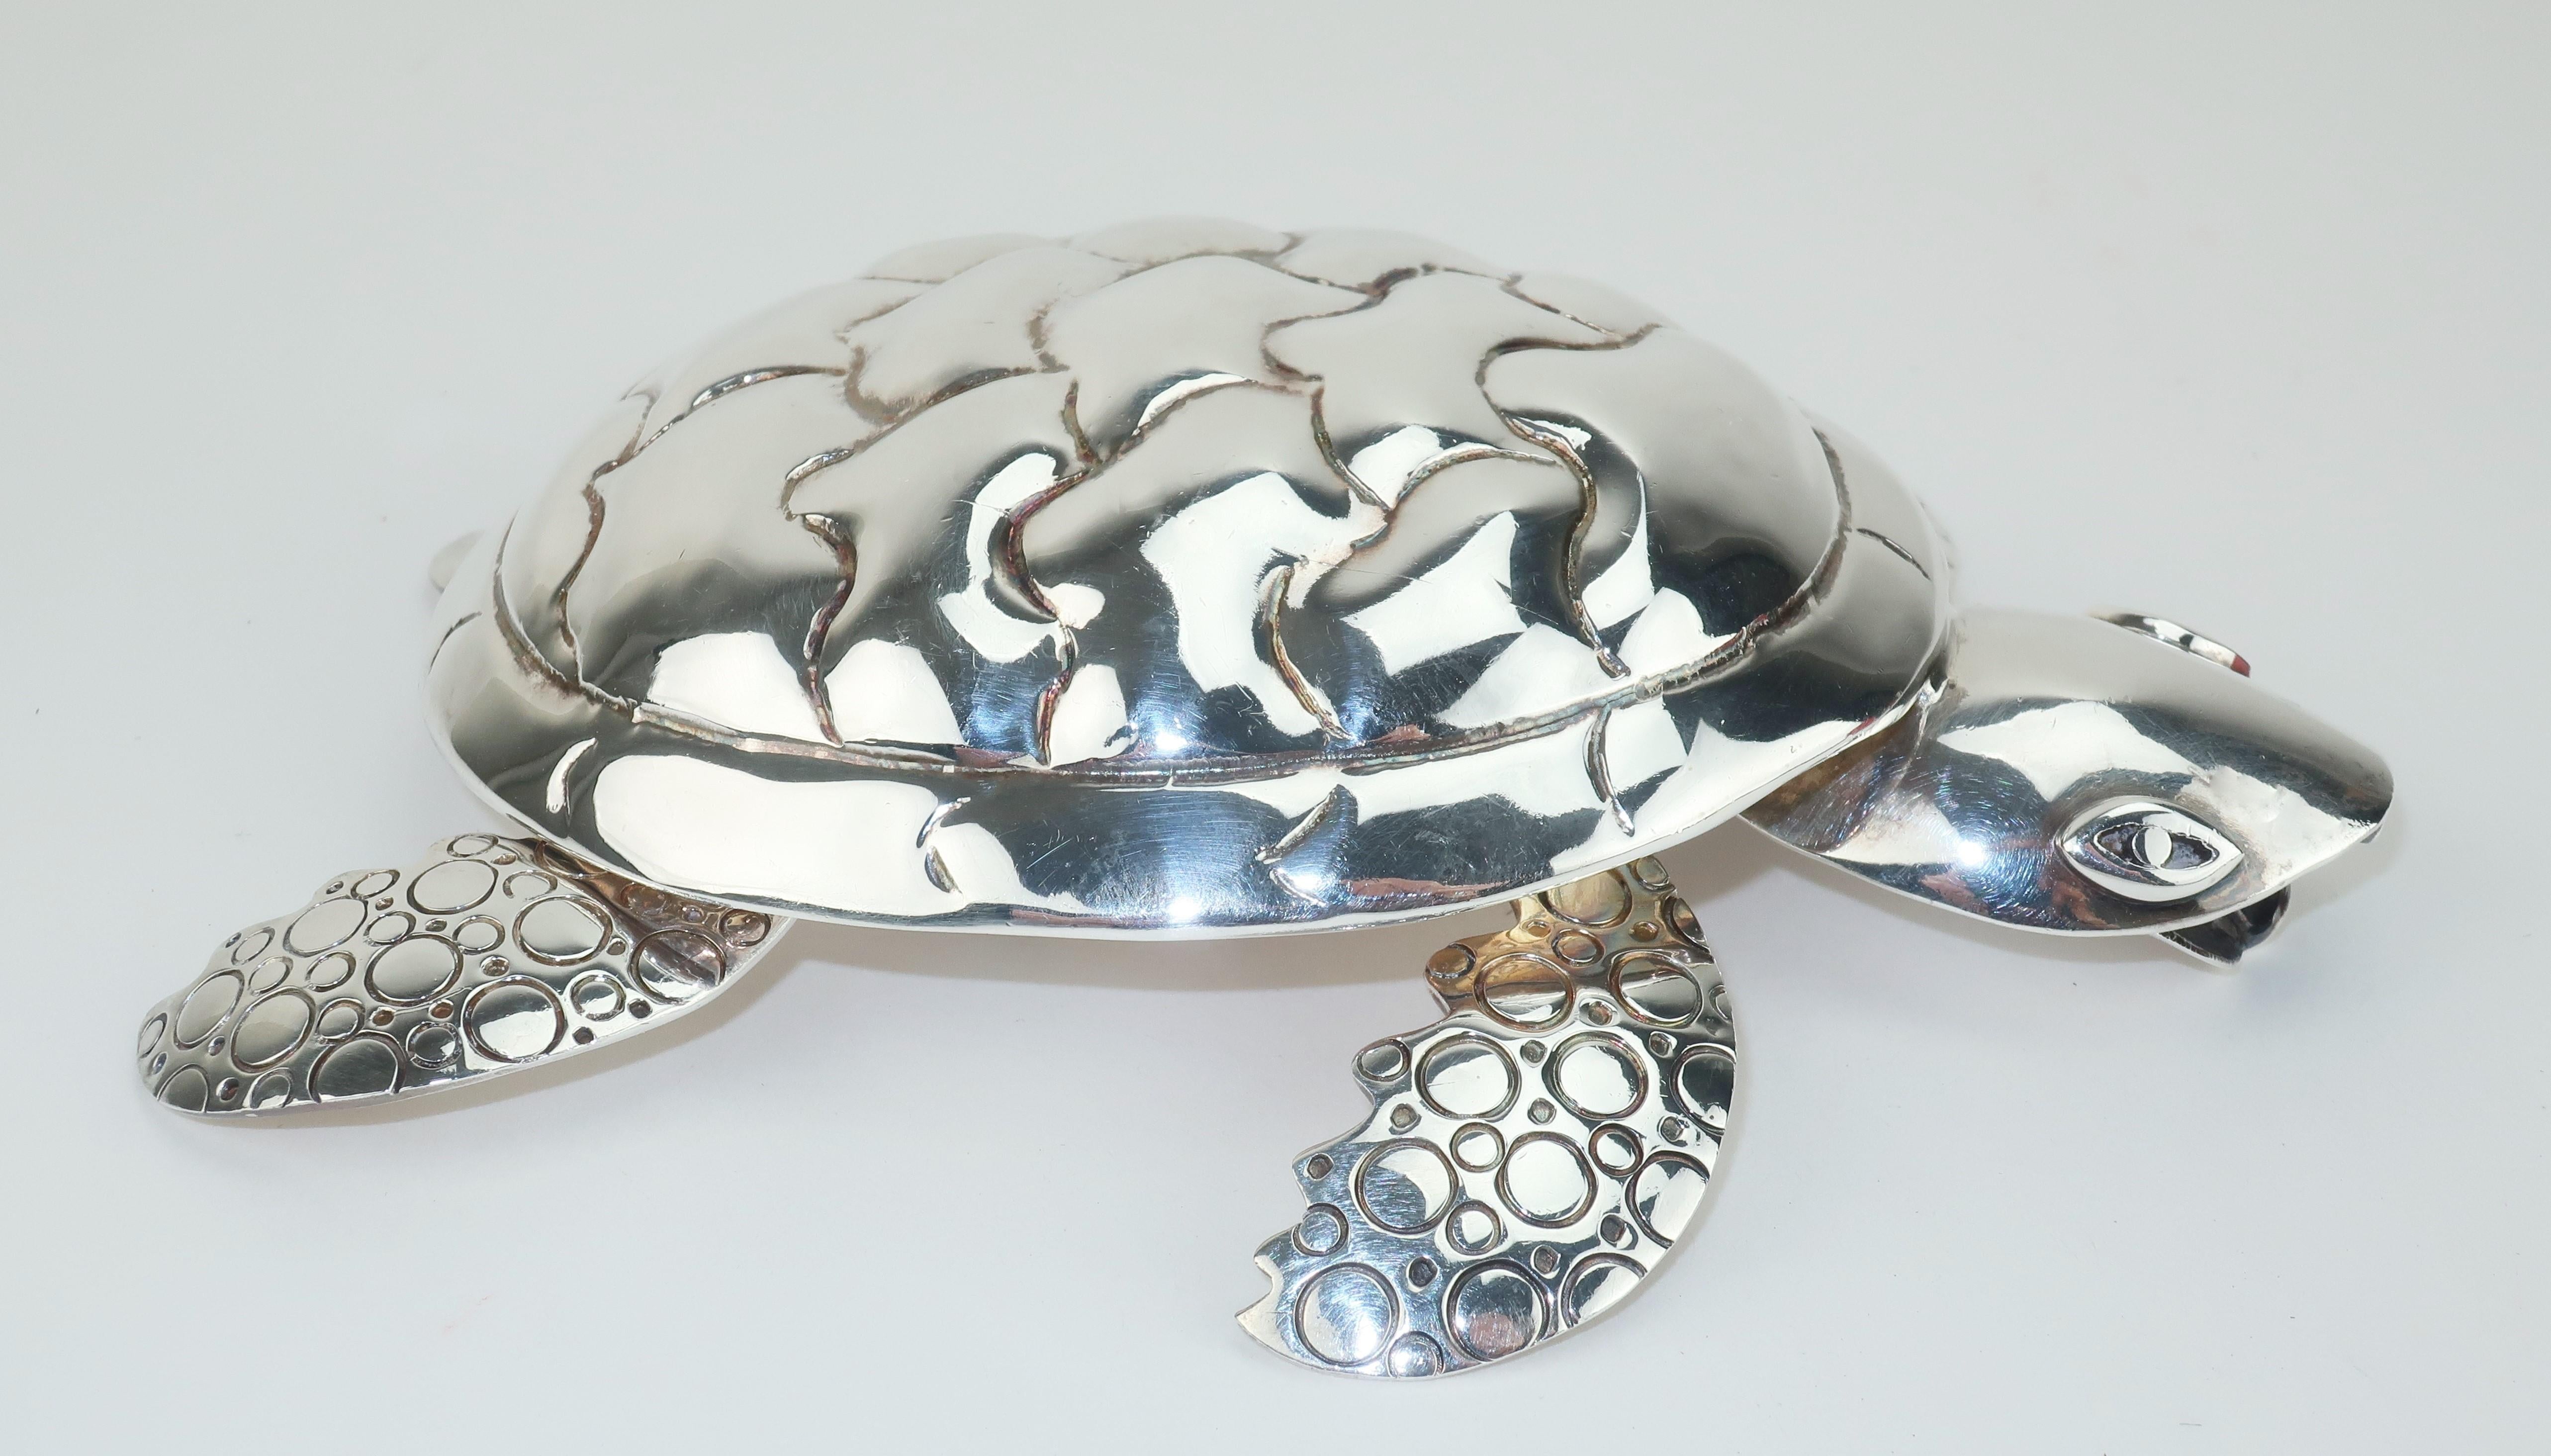 Silverplate turtle bottle opener by Mexican designer, Emilia Castillo, who comes from a long line of Taxco artisans specializing in spectacular metal works. This charming sea turtle is detailed with articulated limbs and tail. As functional as he is